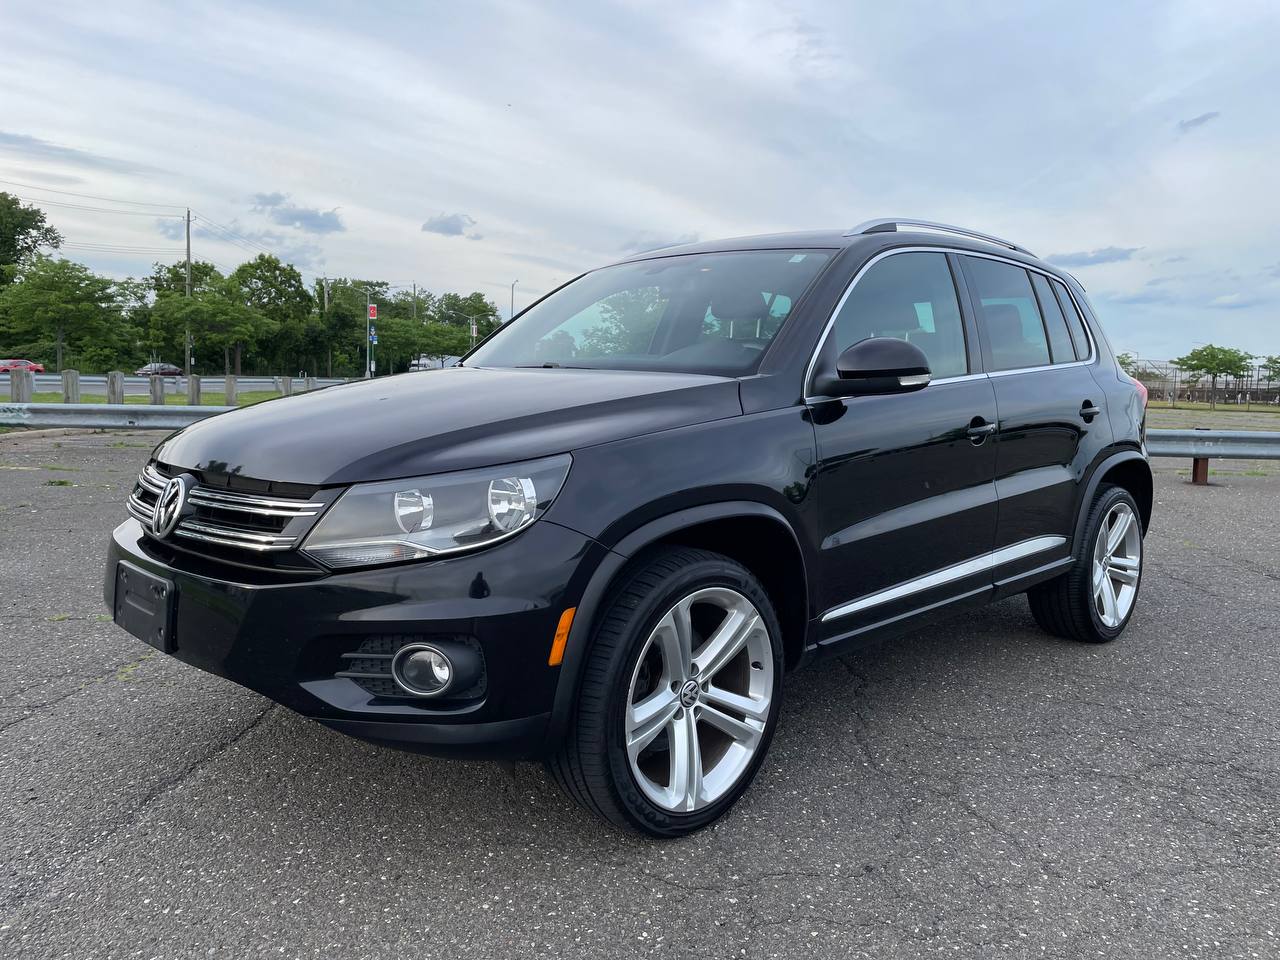 Used Car - 2016 Volkswagen Tiguan R Line 4Motion AWD for Sale in Staten Island, NY